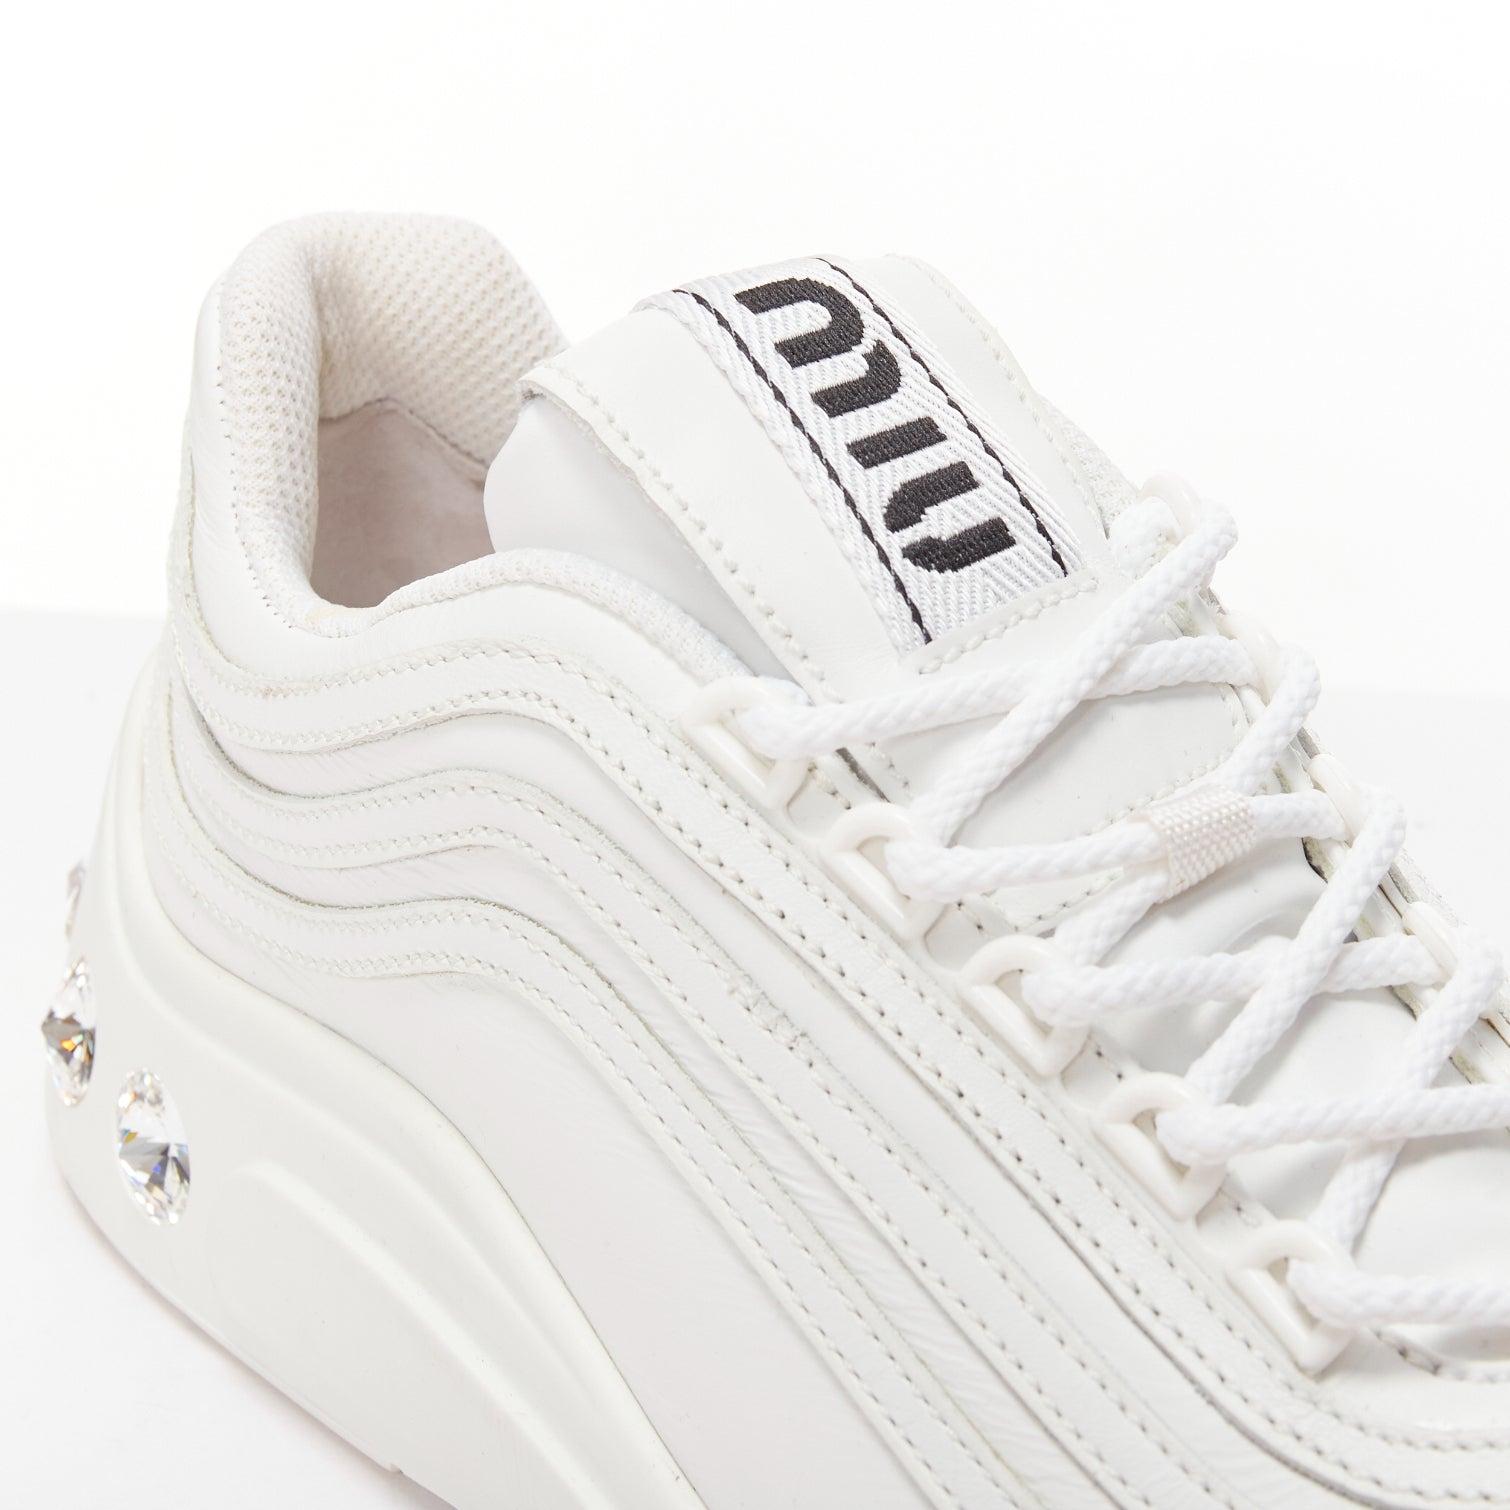 MIU MIU white leather logo tongue clear big crystal heels chunky sneakers EU38
Reference: AAWC/A01172
Brand: Miu Miu
Designer: Miuccia Prada
Material: Leather
Color: White, Black
Pattern: Crystals
Closure: Lace Up
Lining: White Leather
Extra